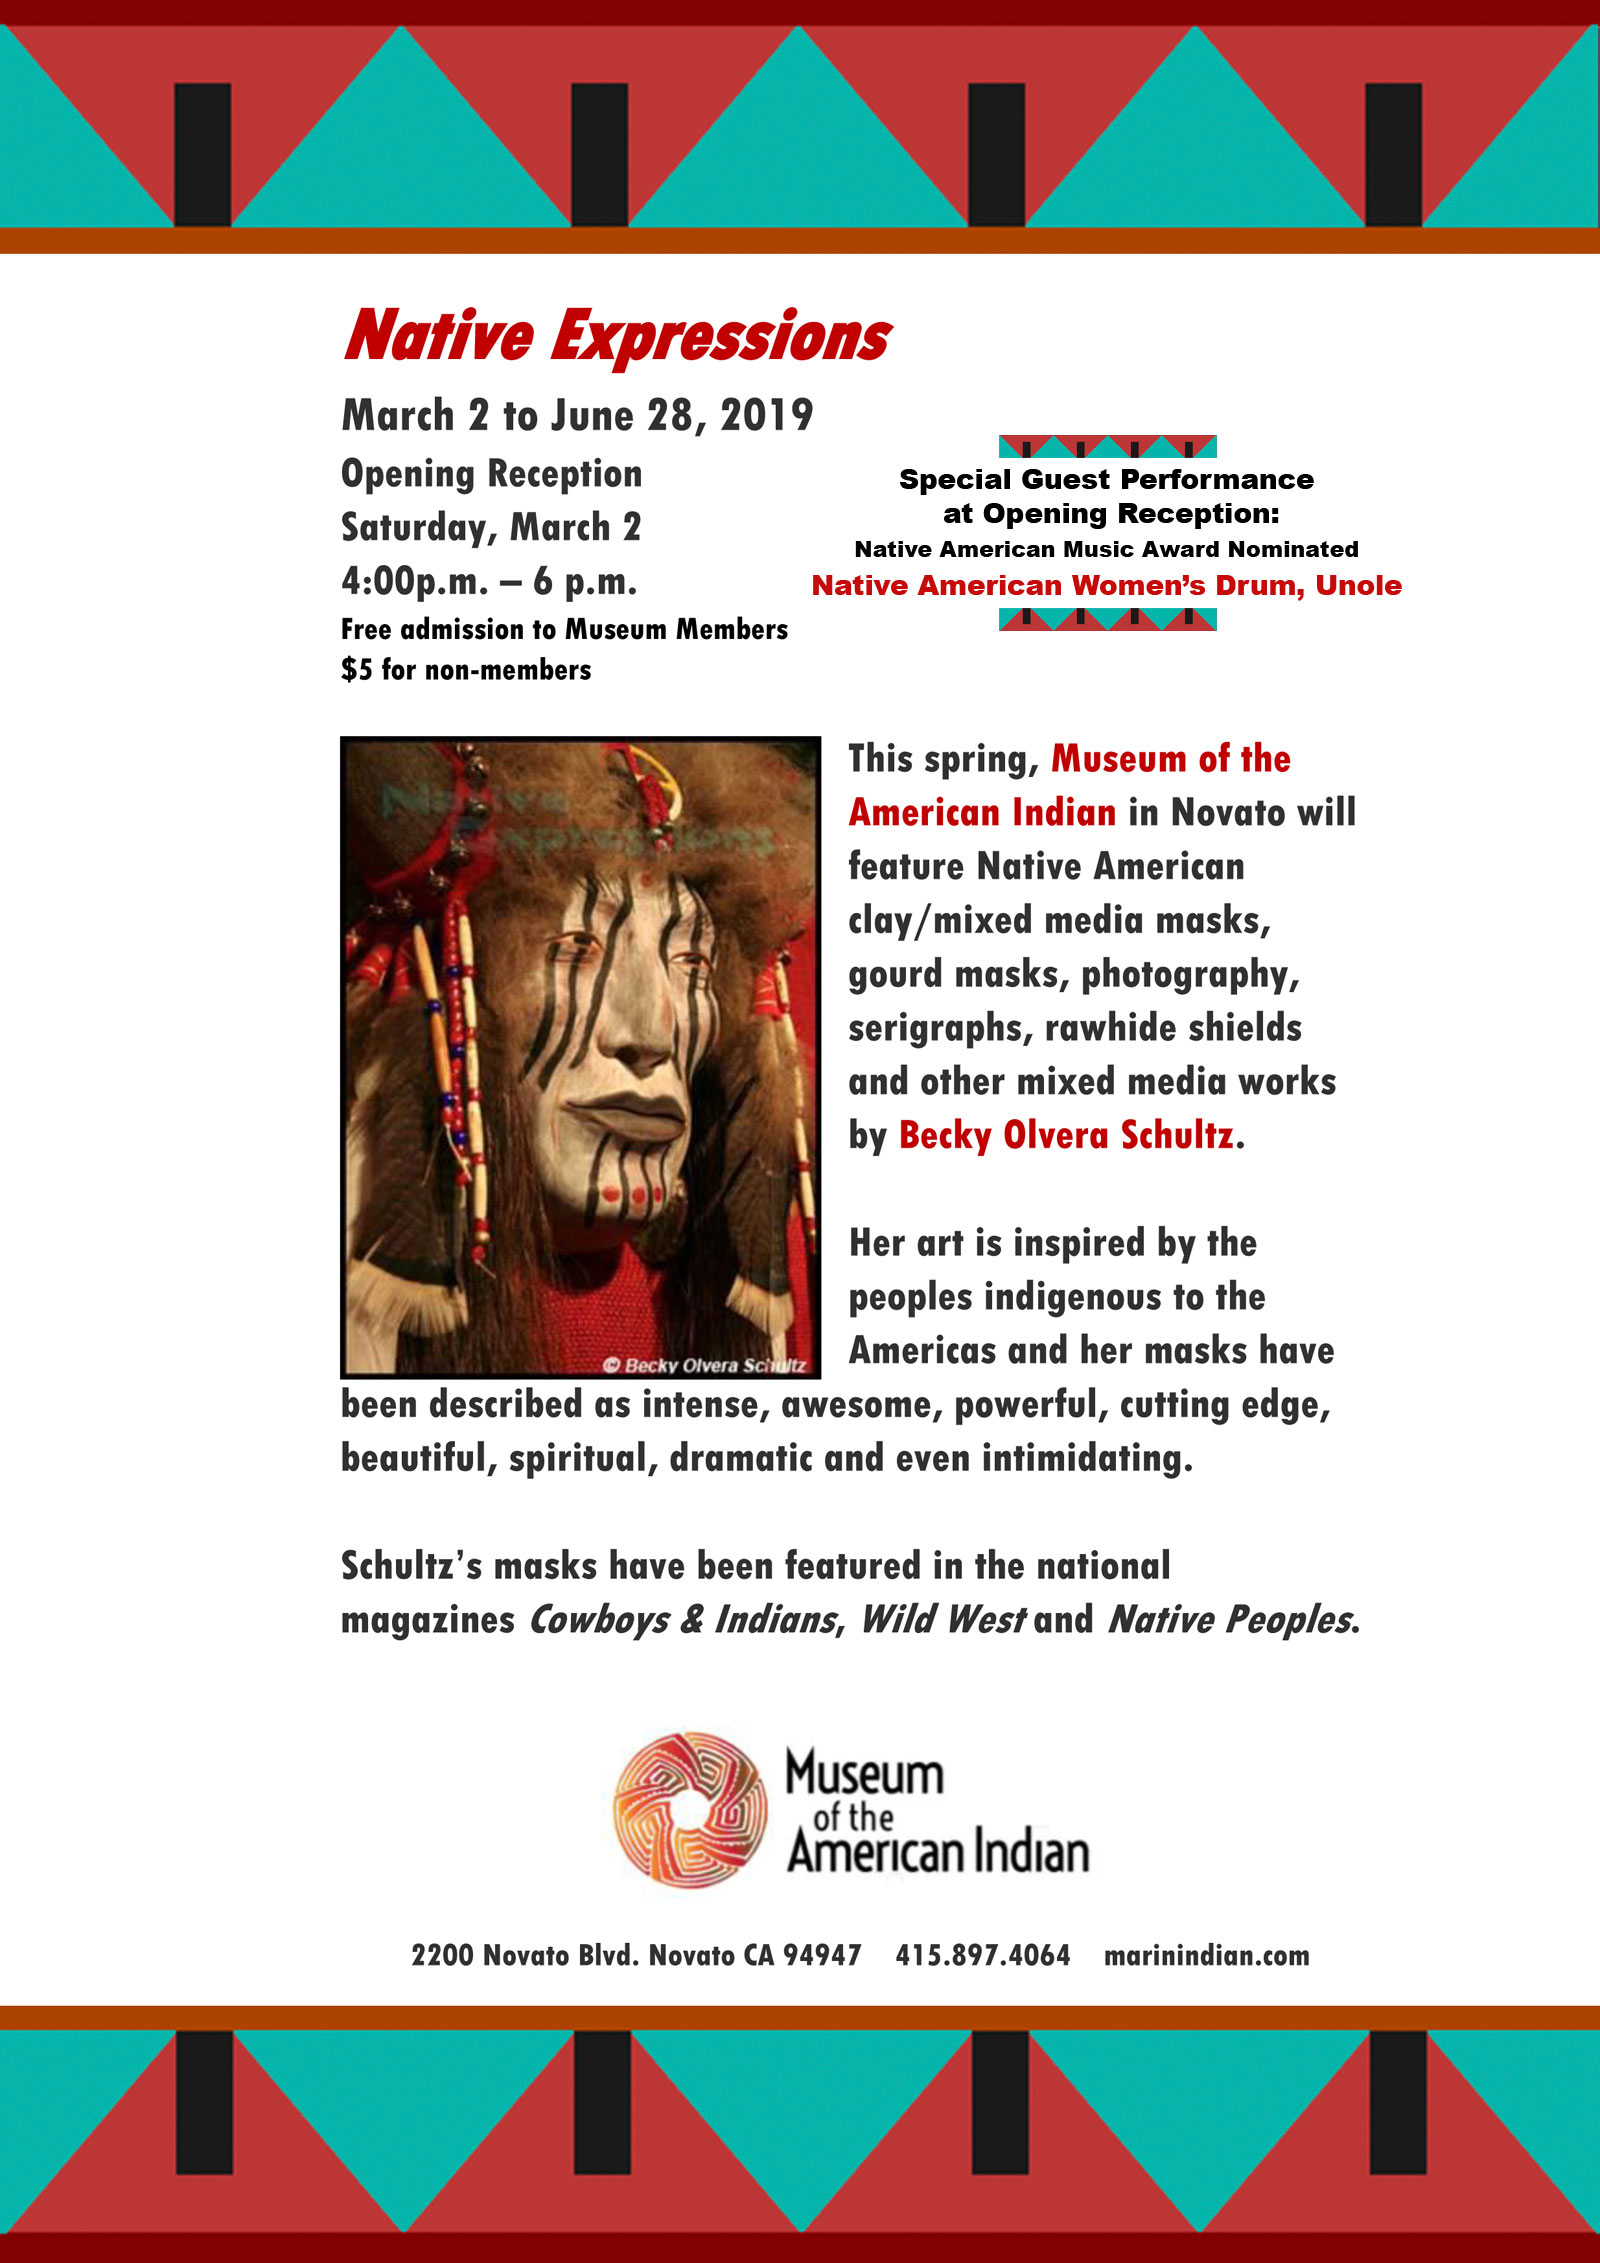 Native Expressions, Art Exhibit at Museum of the American Indian, Novato, CA-Flyer